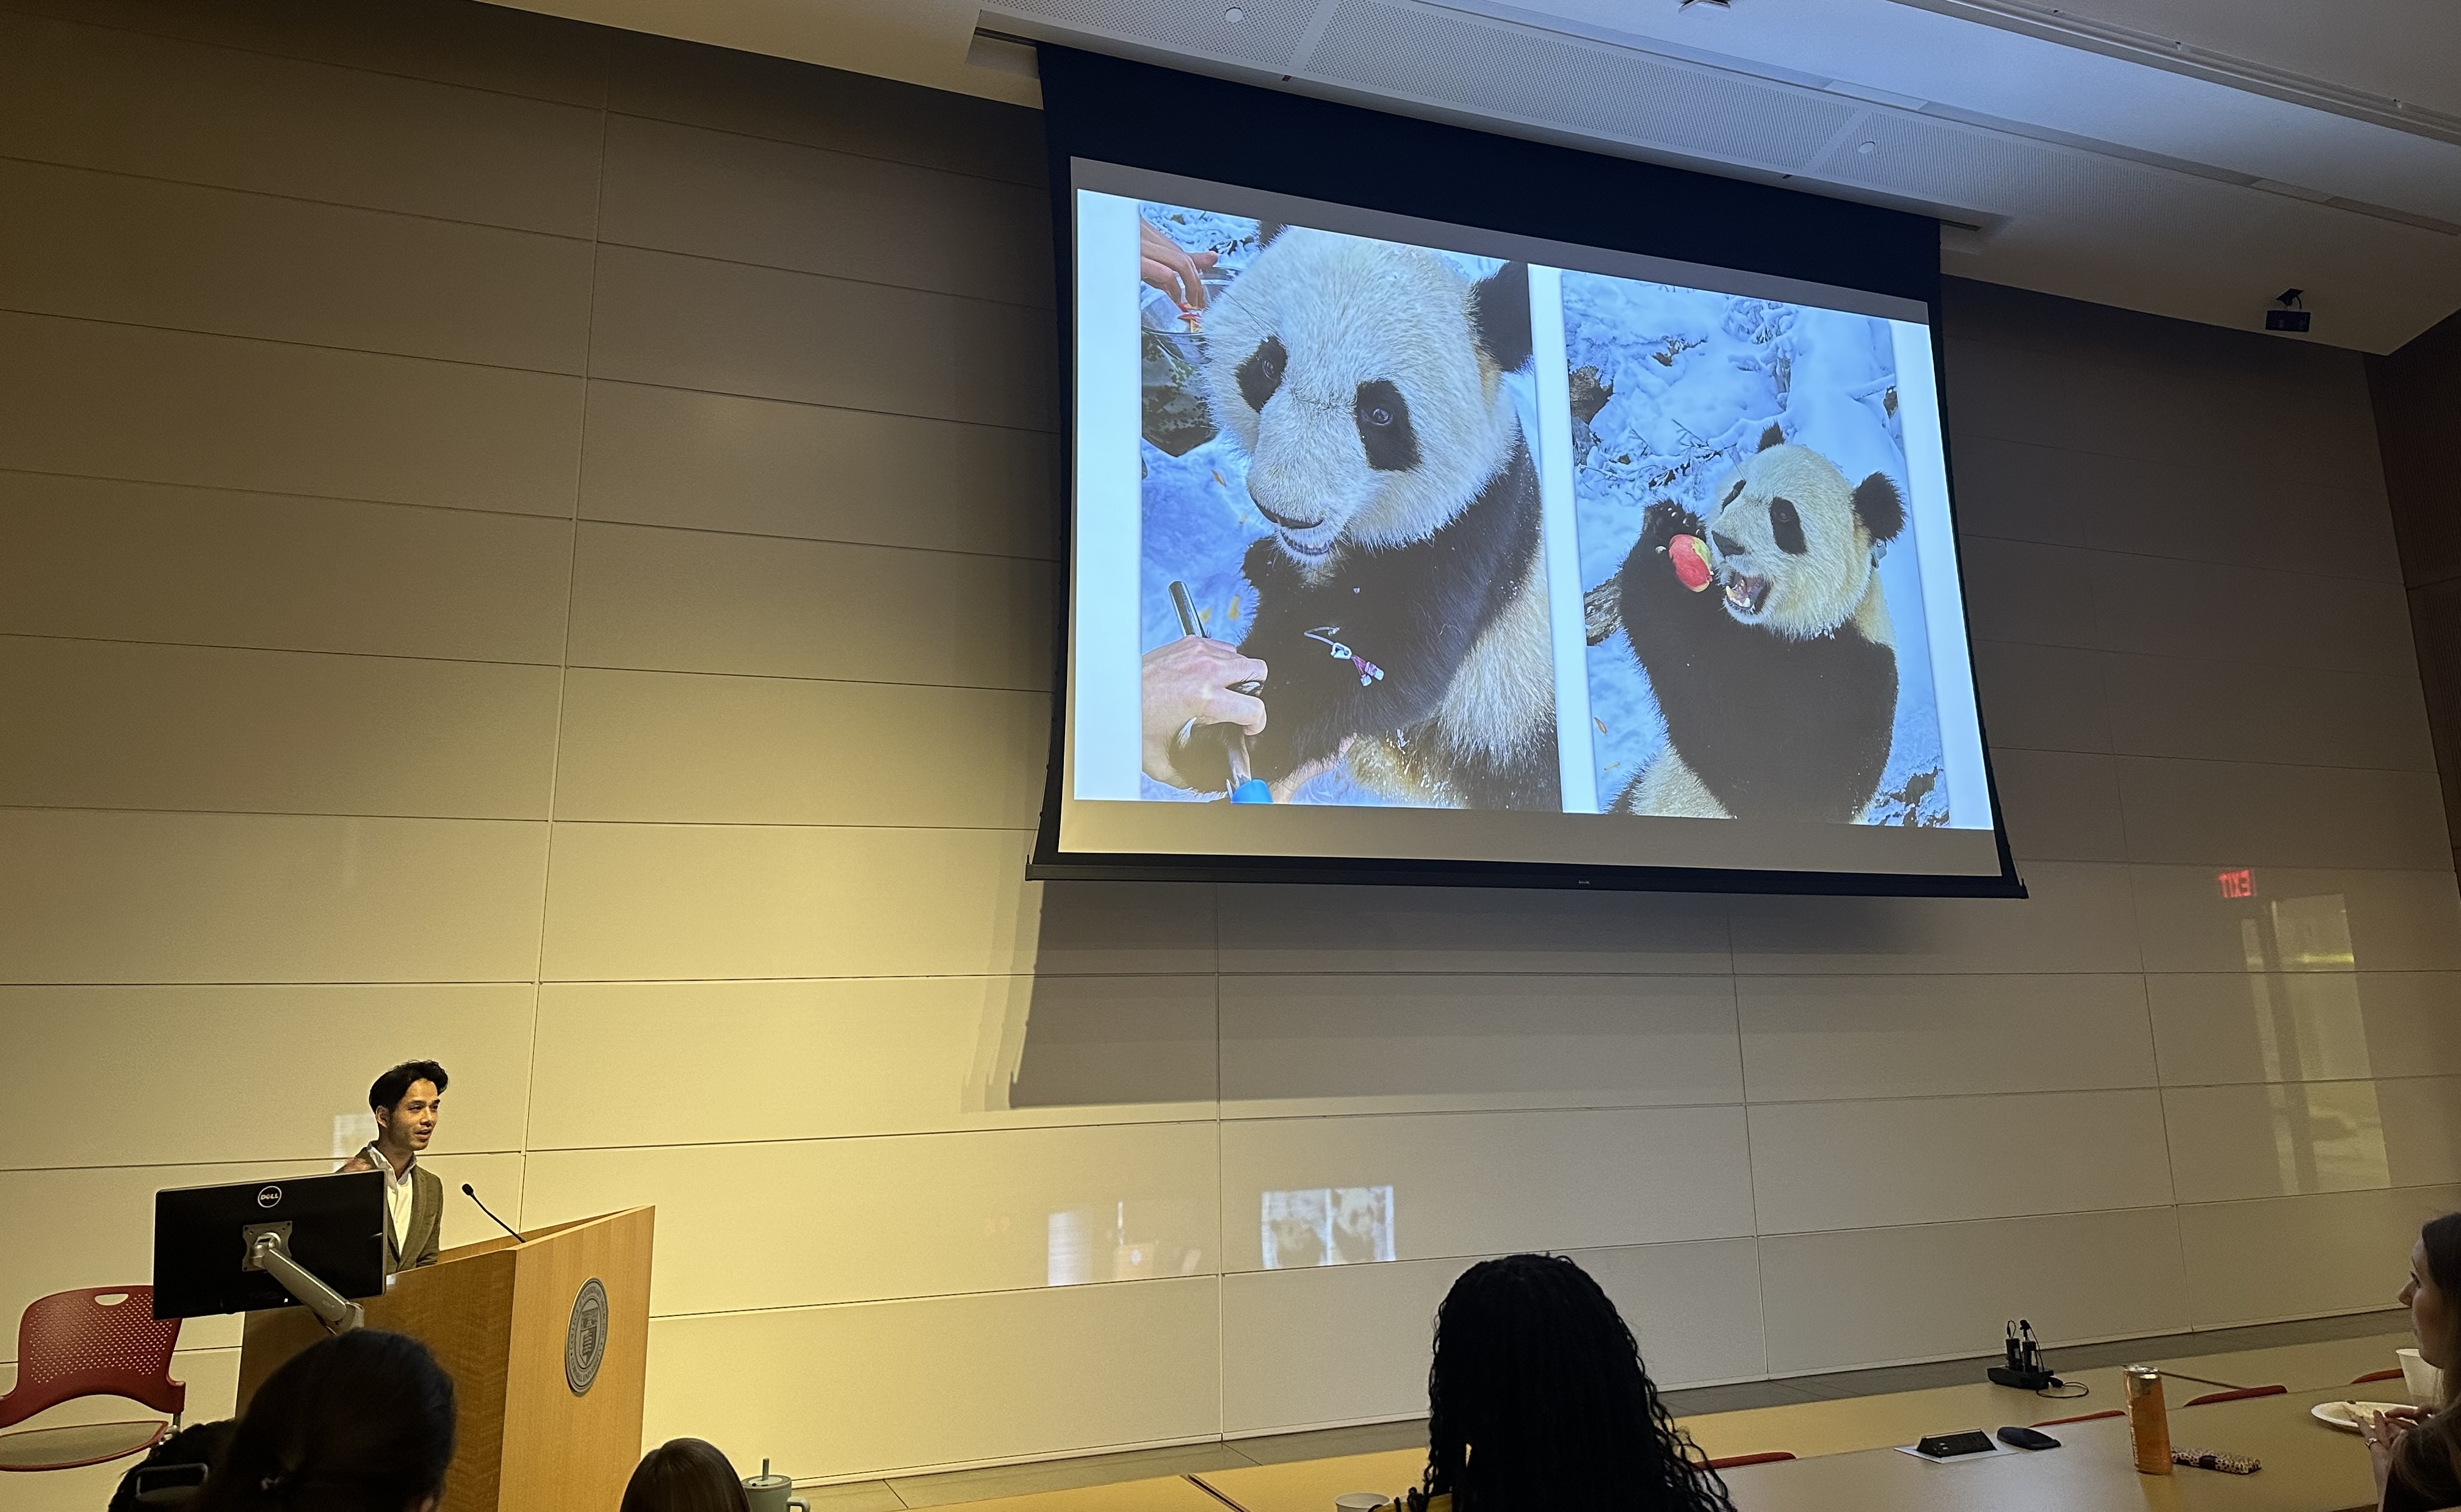 Wildlife Conservation Day presentation showing a slide with Giant Pandas.